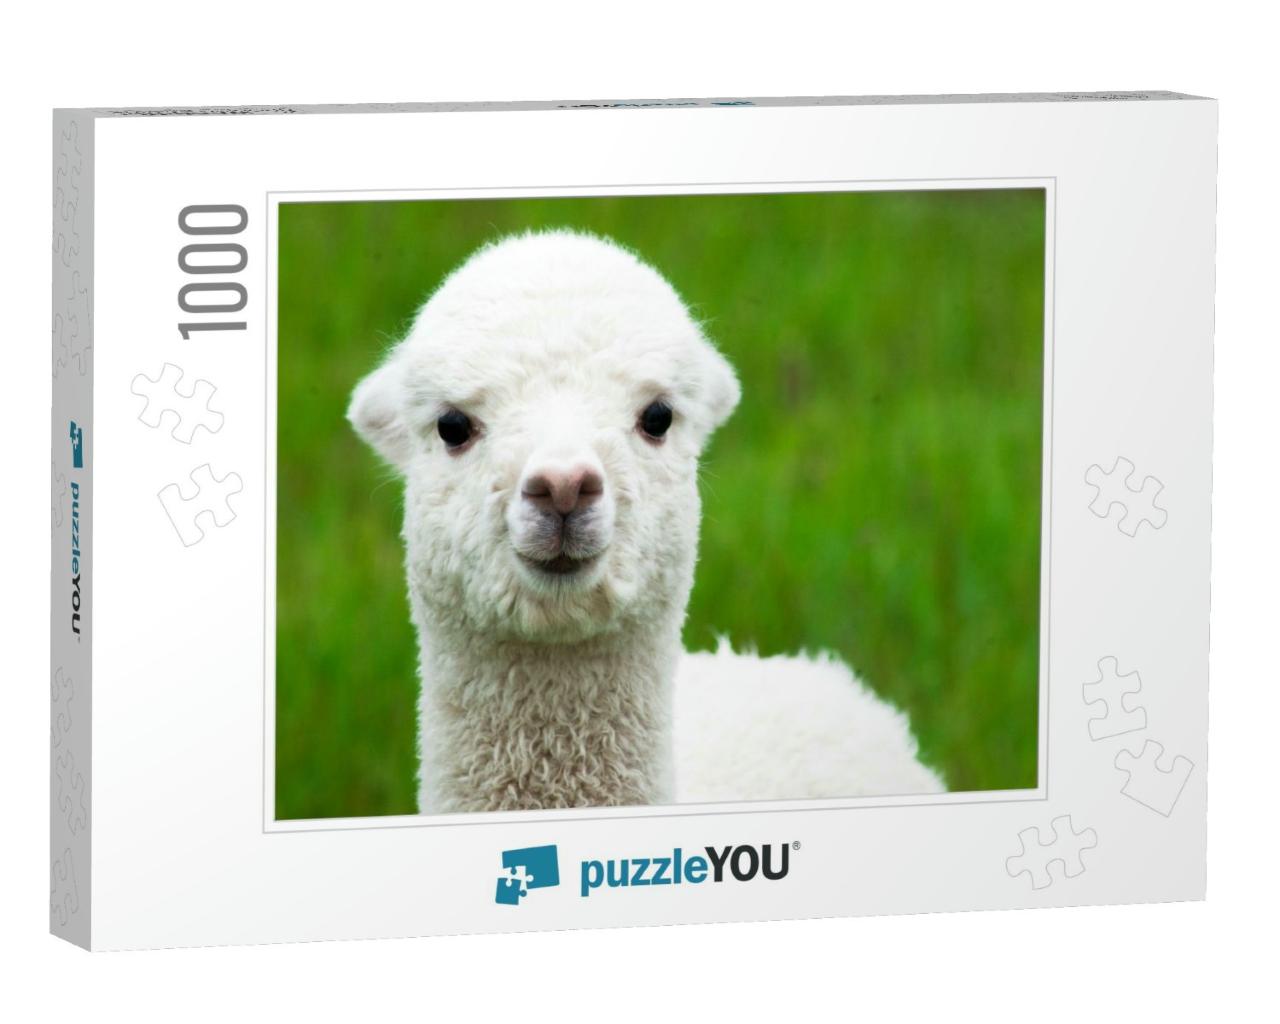 Cute White Alpaca Baby Closeup... Jigsaw Puzzle with 1000 pieces